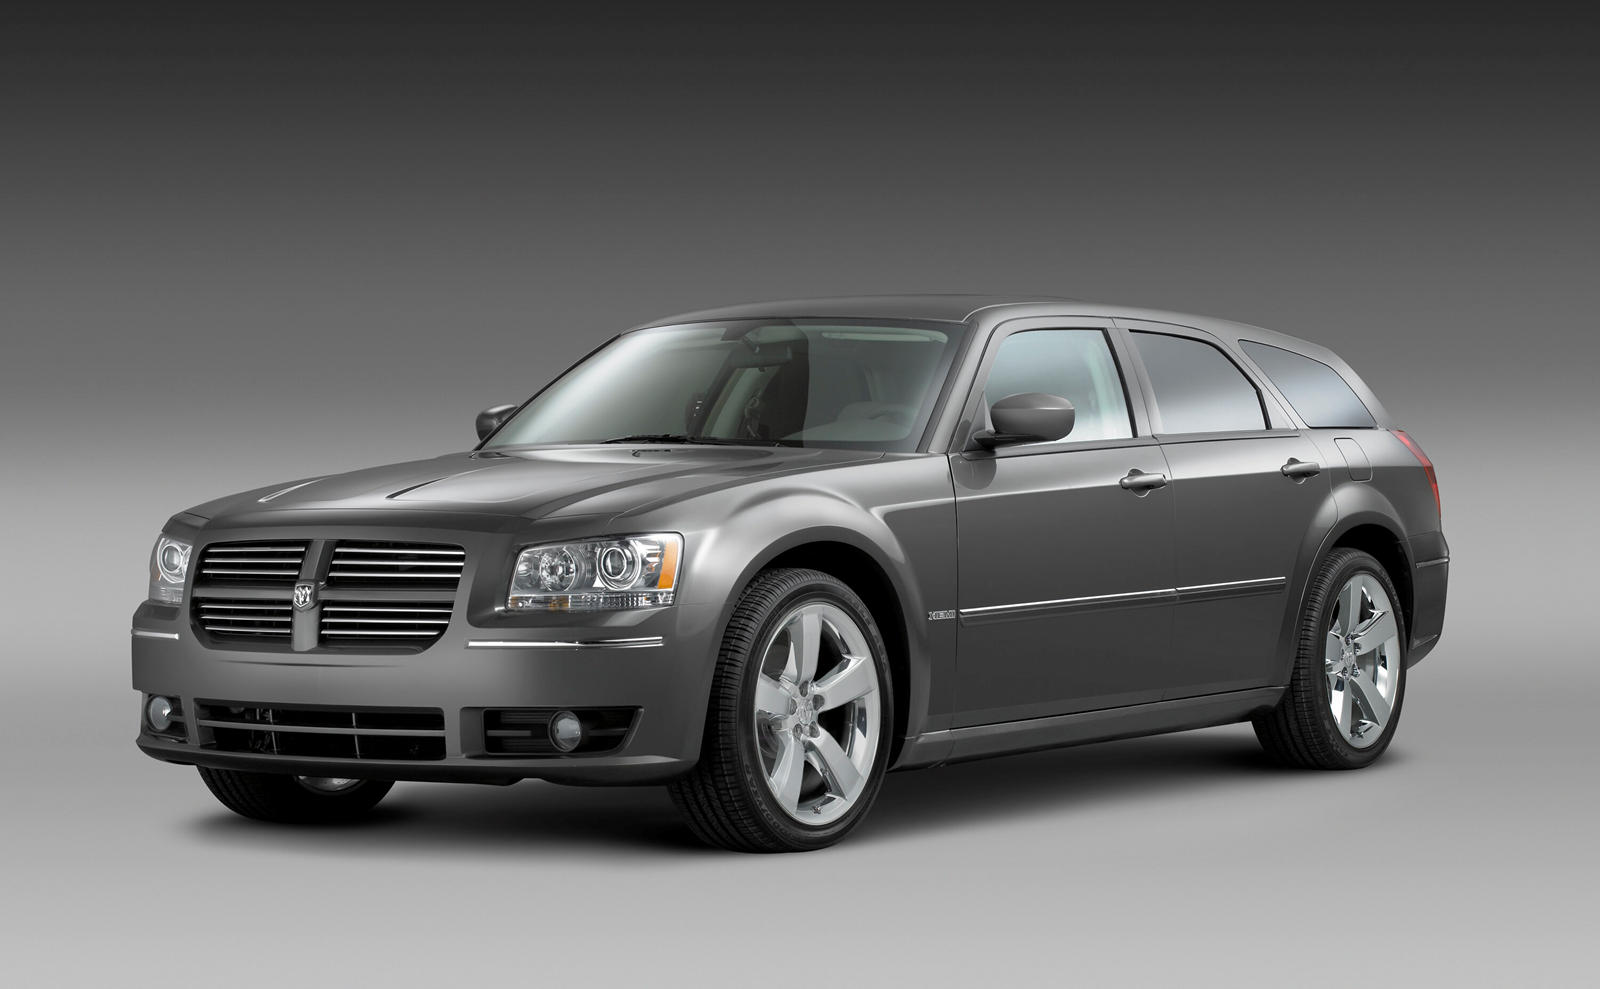 dodge magnum for sale awd Used Dodge Magnum AWD for sale: buy All Wheel Drive Wagon